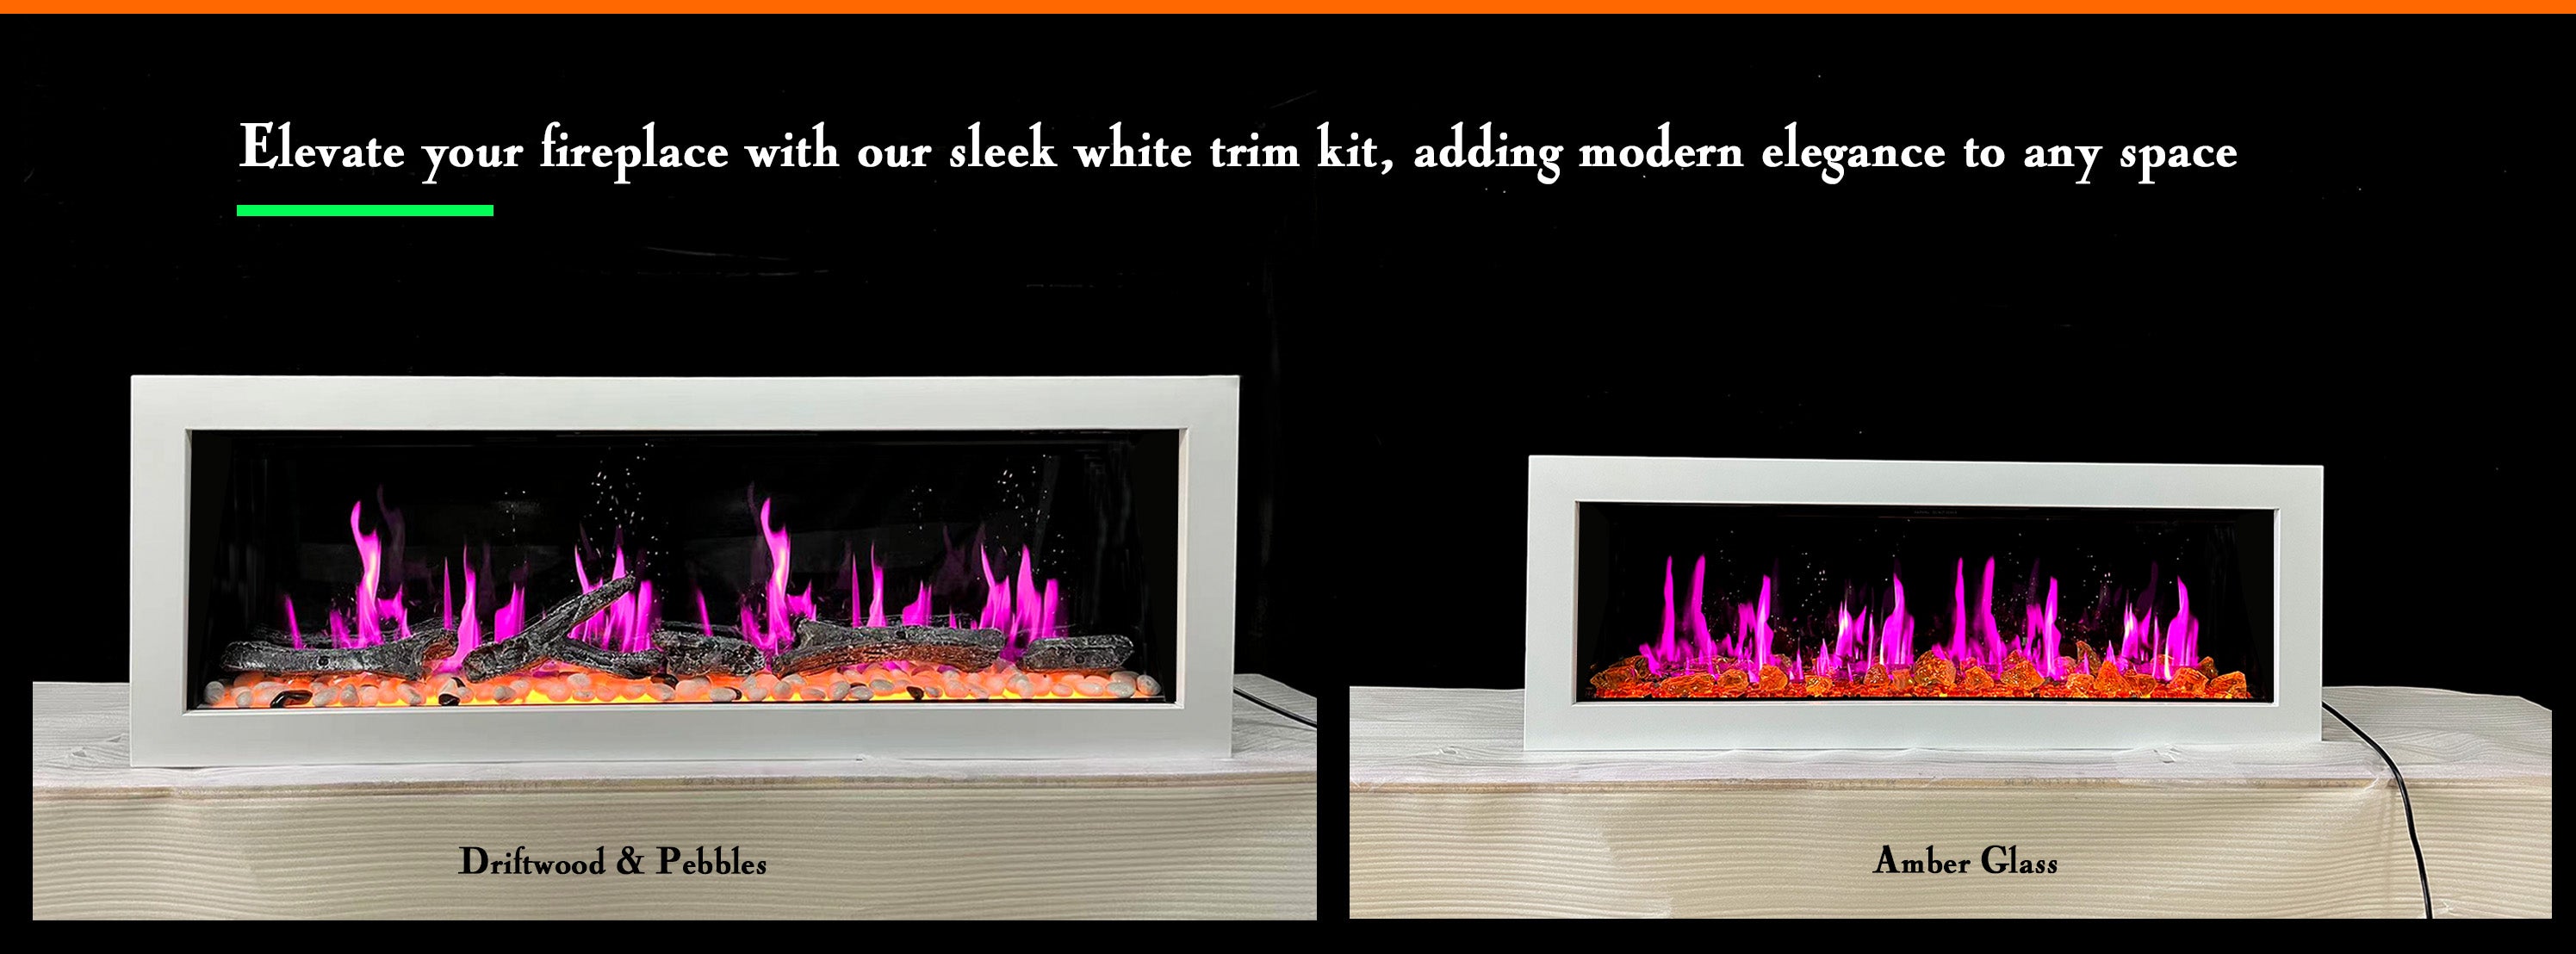 white trim kit electric fireplace with pebbles driftwood, Amber Glass, Crystals logset